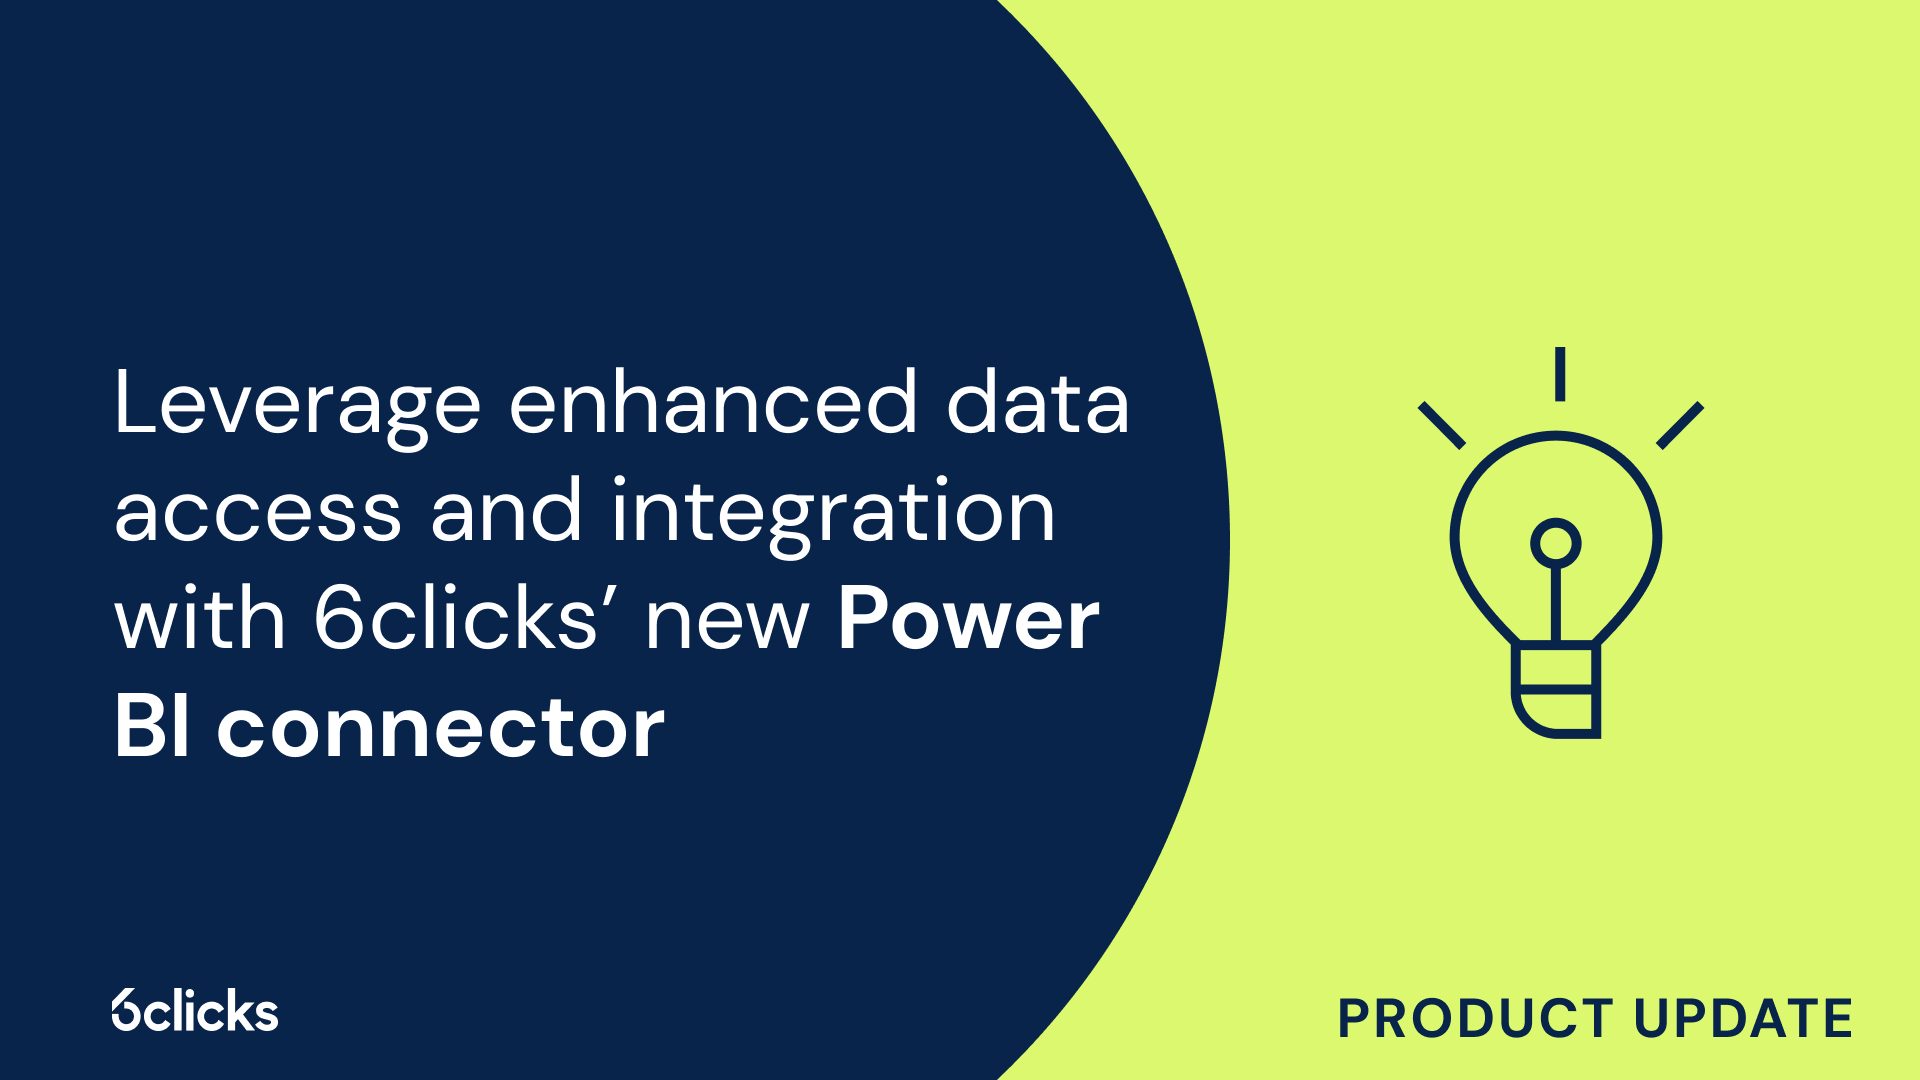 Leverage enhanced data access and integration with 6clicks' new Power BI connector